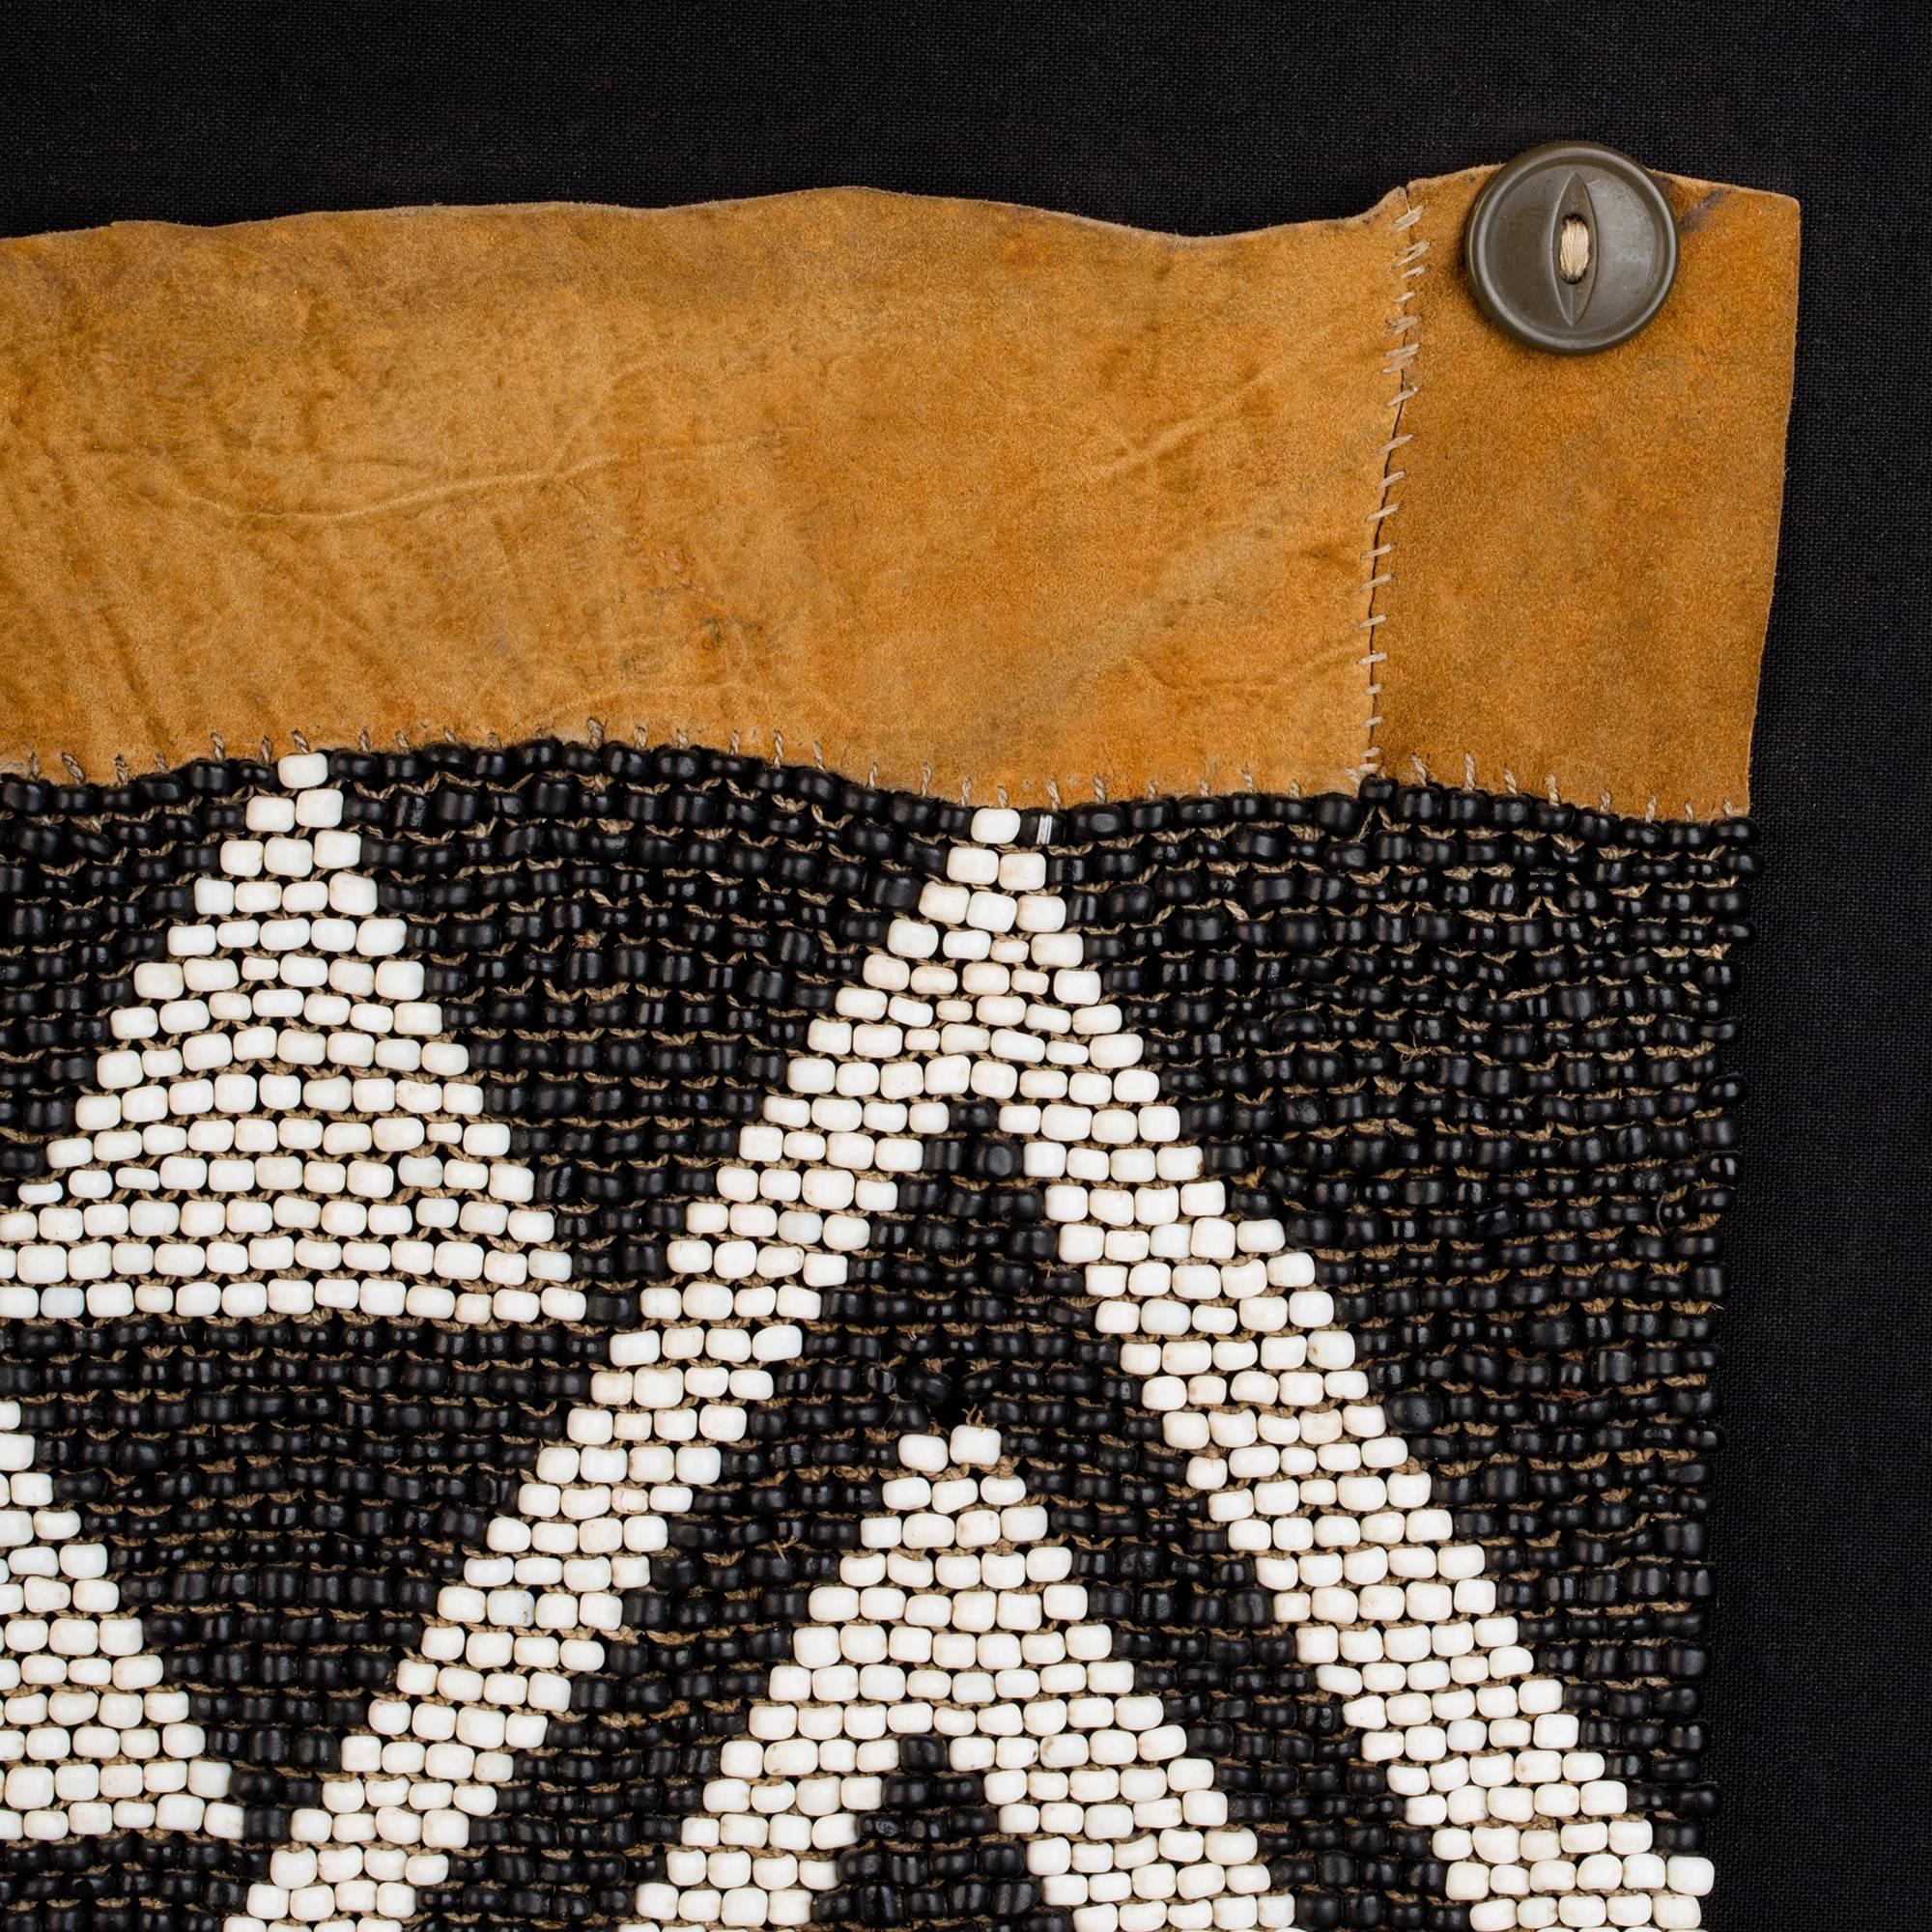 A stunning apron from Botswana, featuring strong geometric designs in dense, graphic sections that seem almost to evoke an abstract landscape with suggestions of mountain, sky, and shadow. Inverting the continuity of black and white at the equator